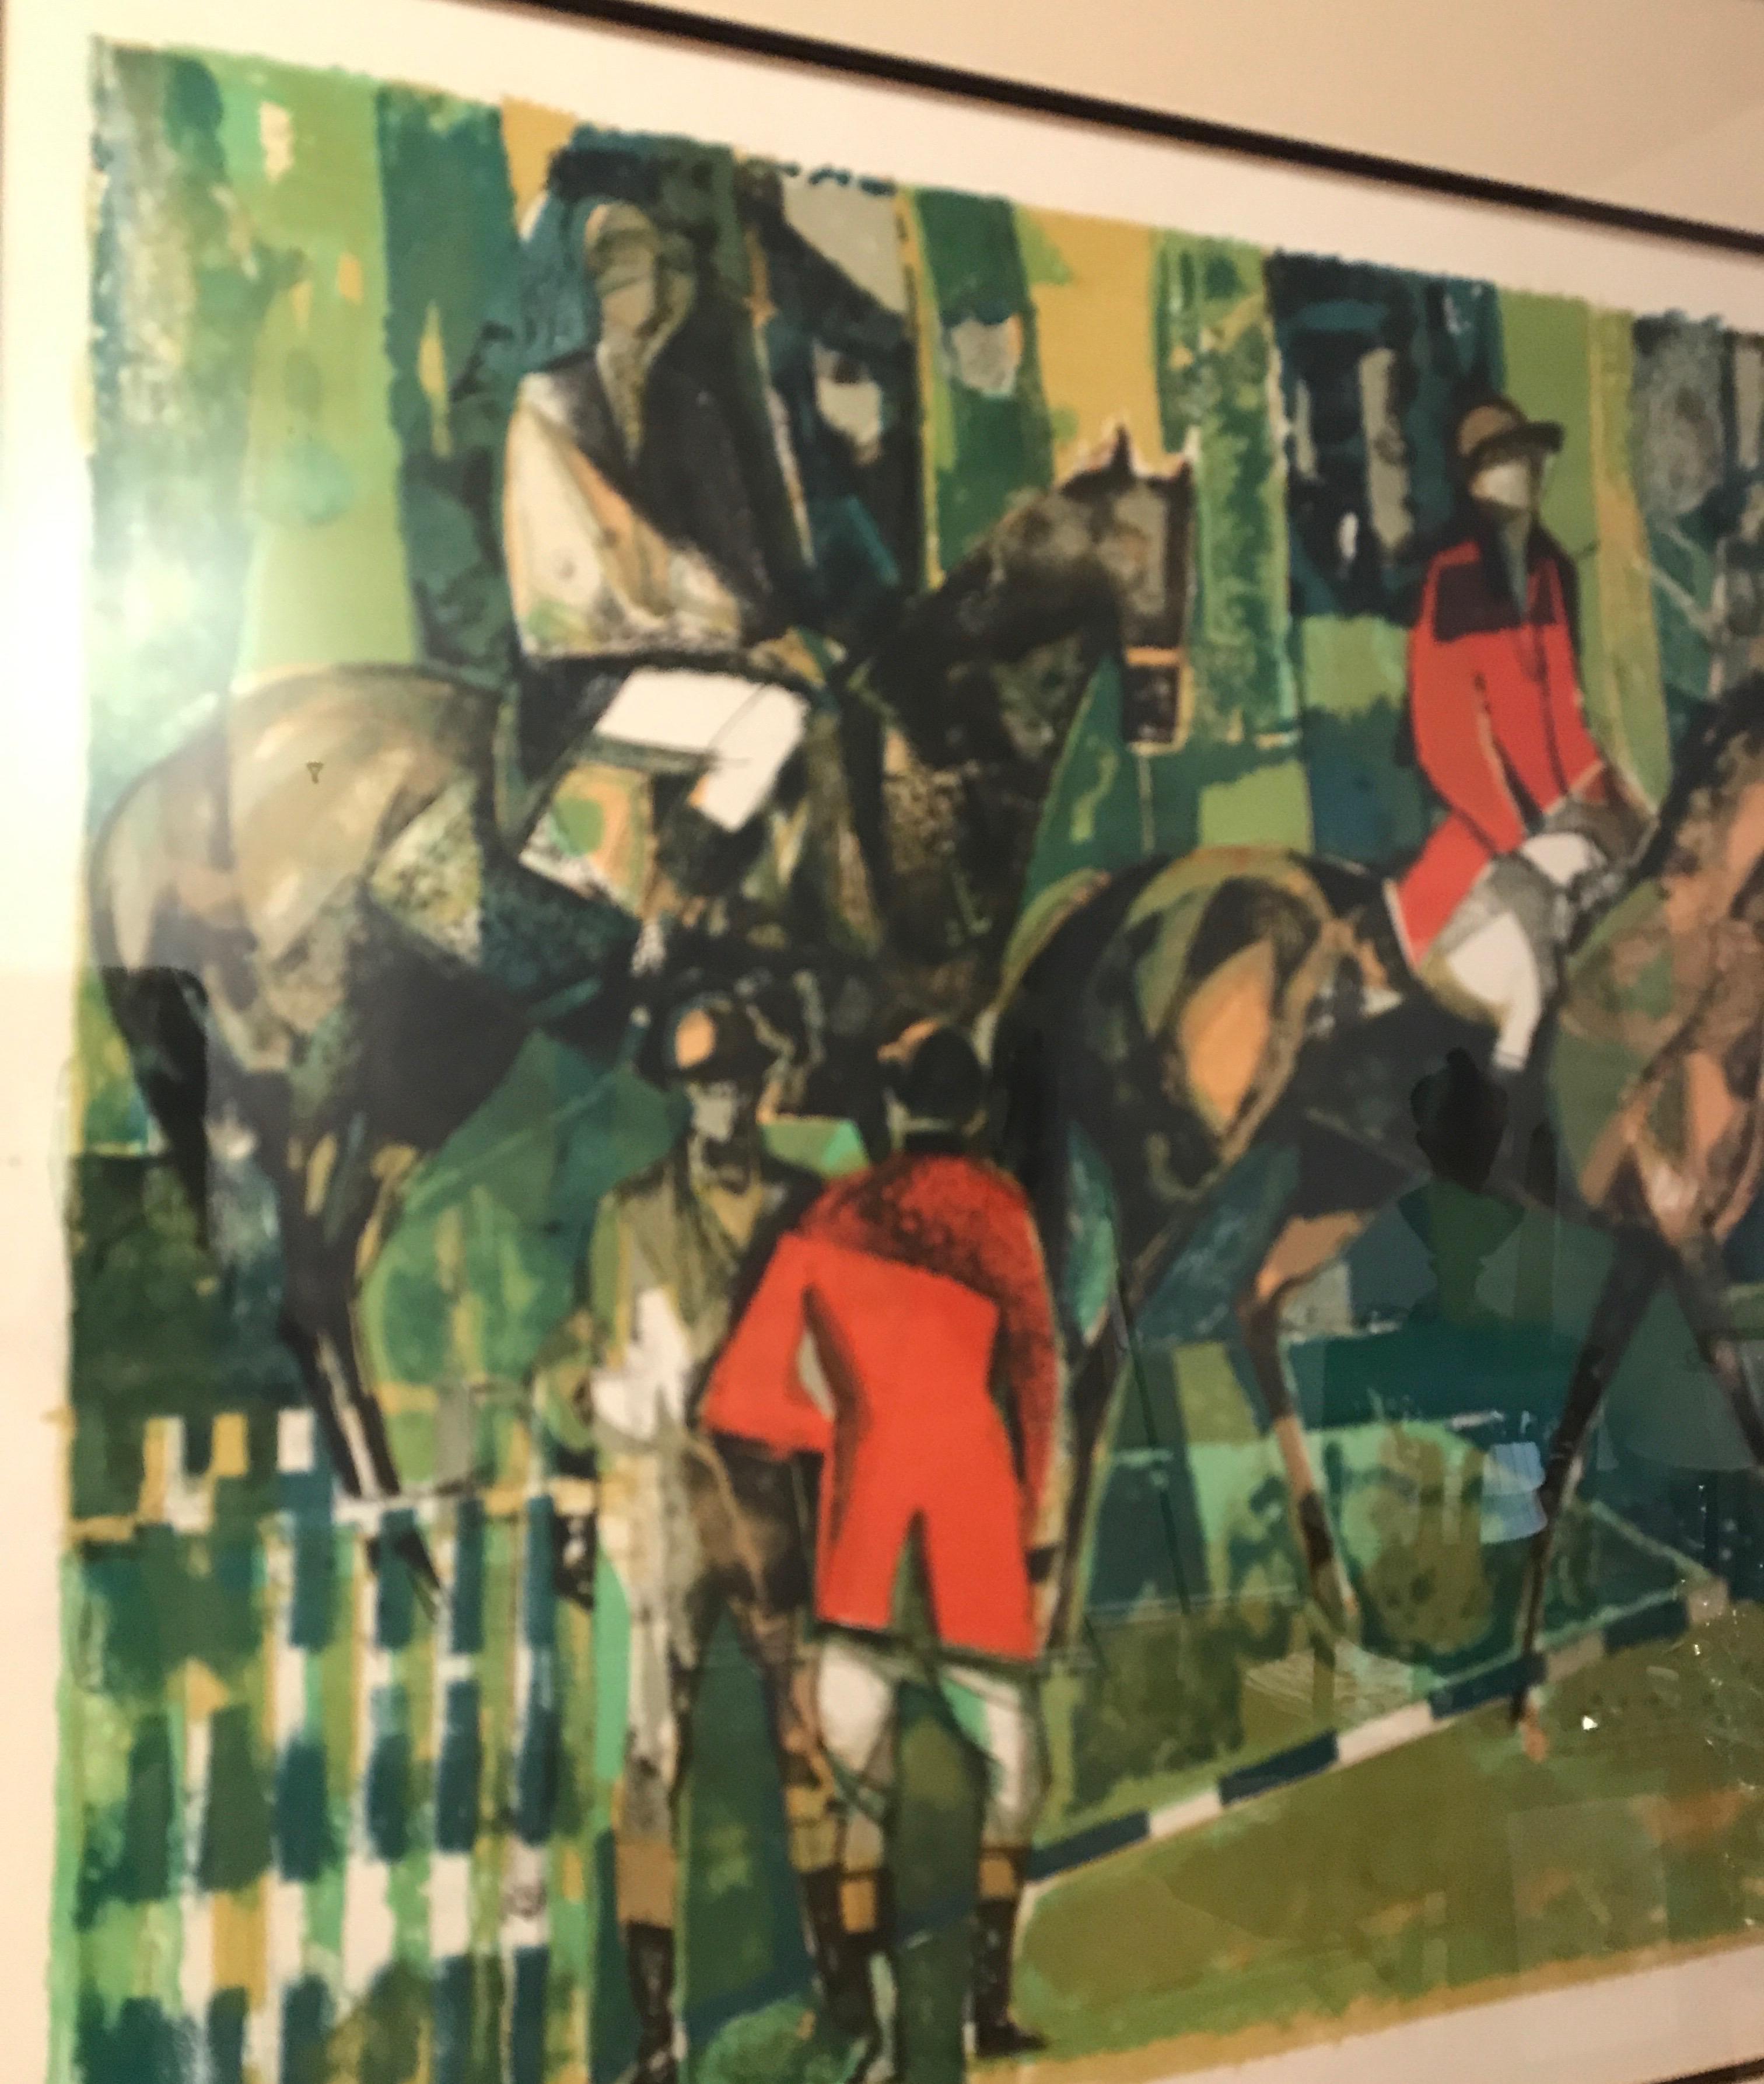 Wonderful equestrian lithograph done in a very contemporary abstract way. Coloration pops.